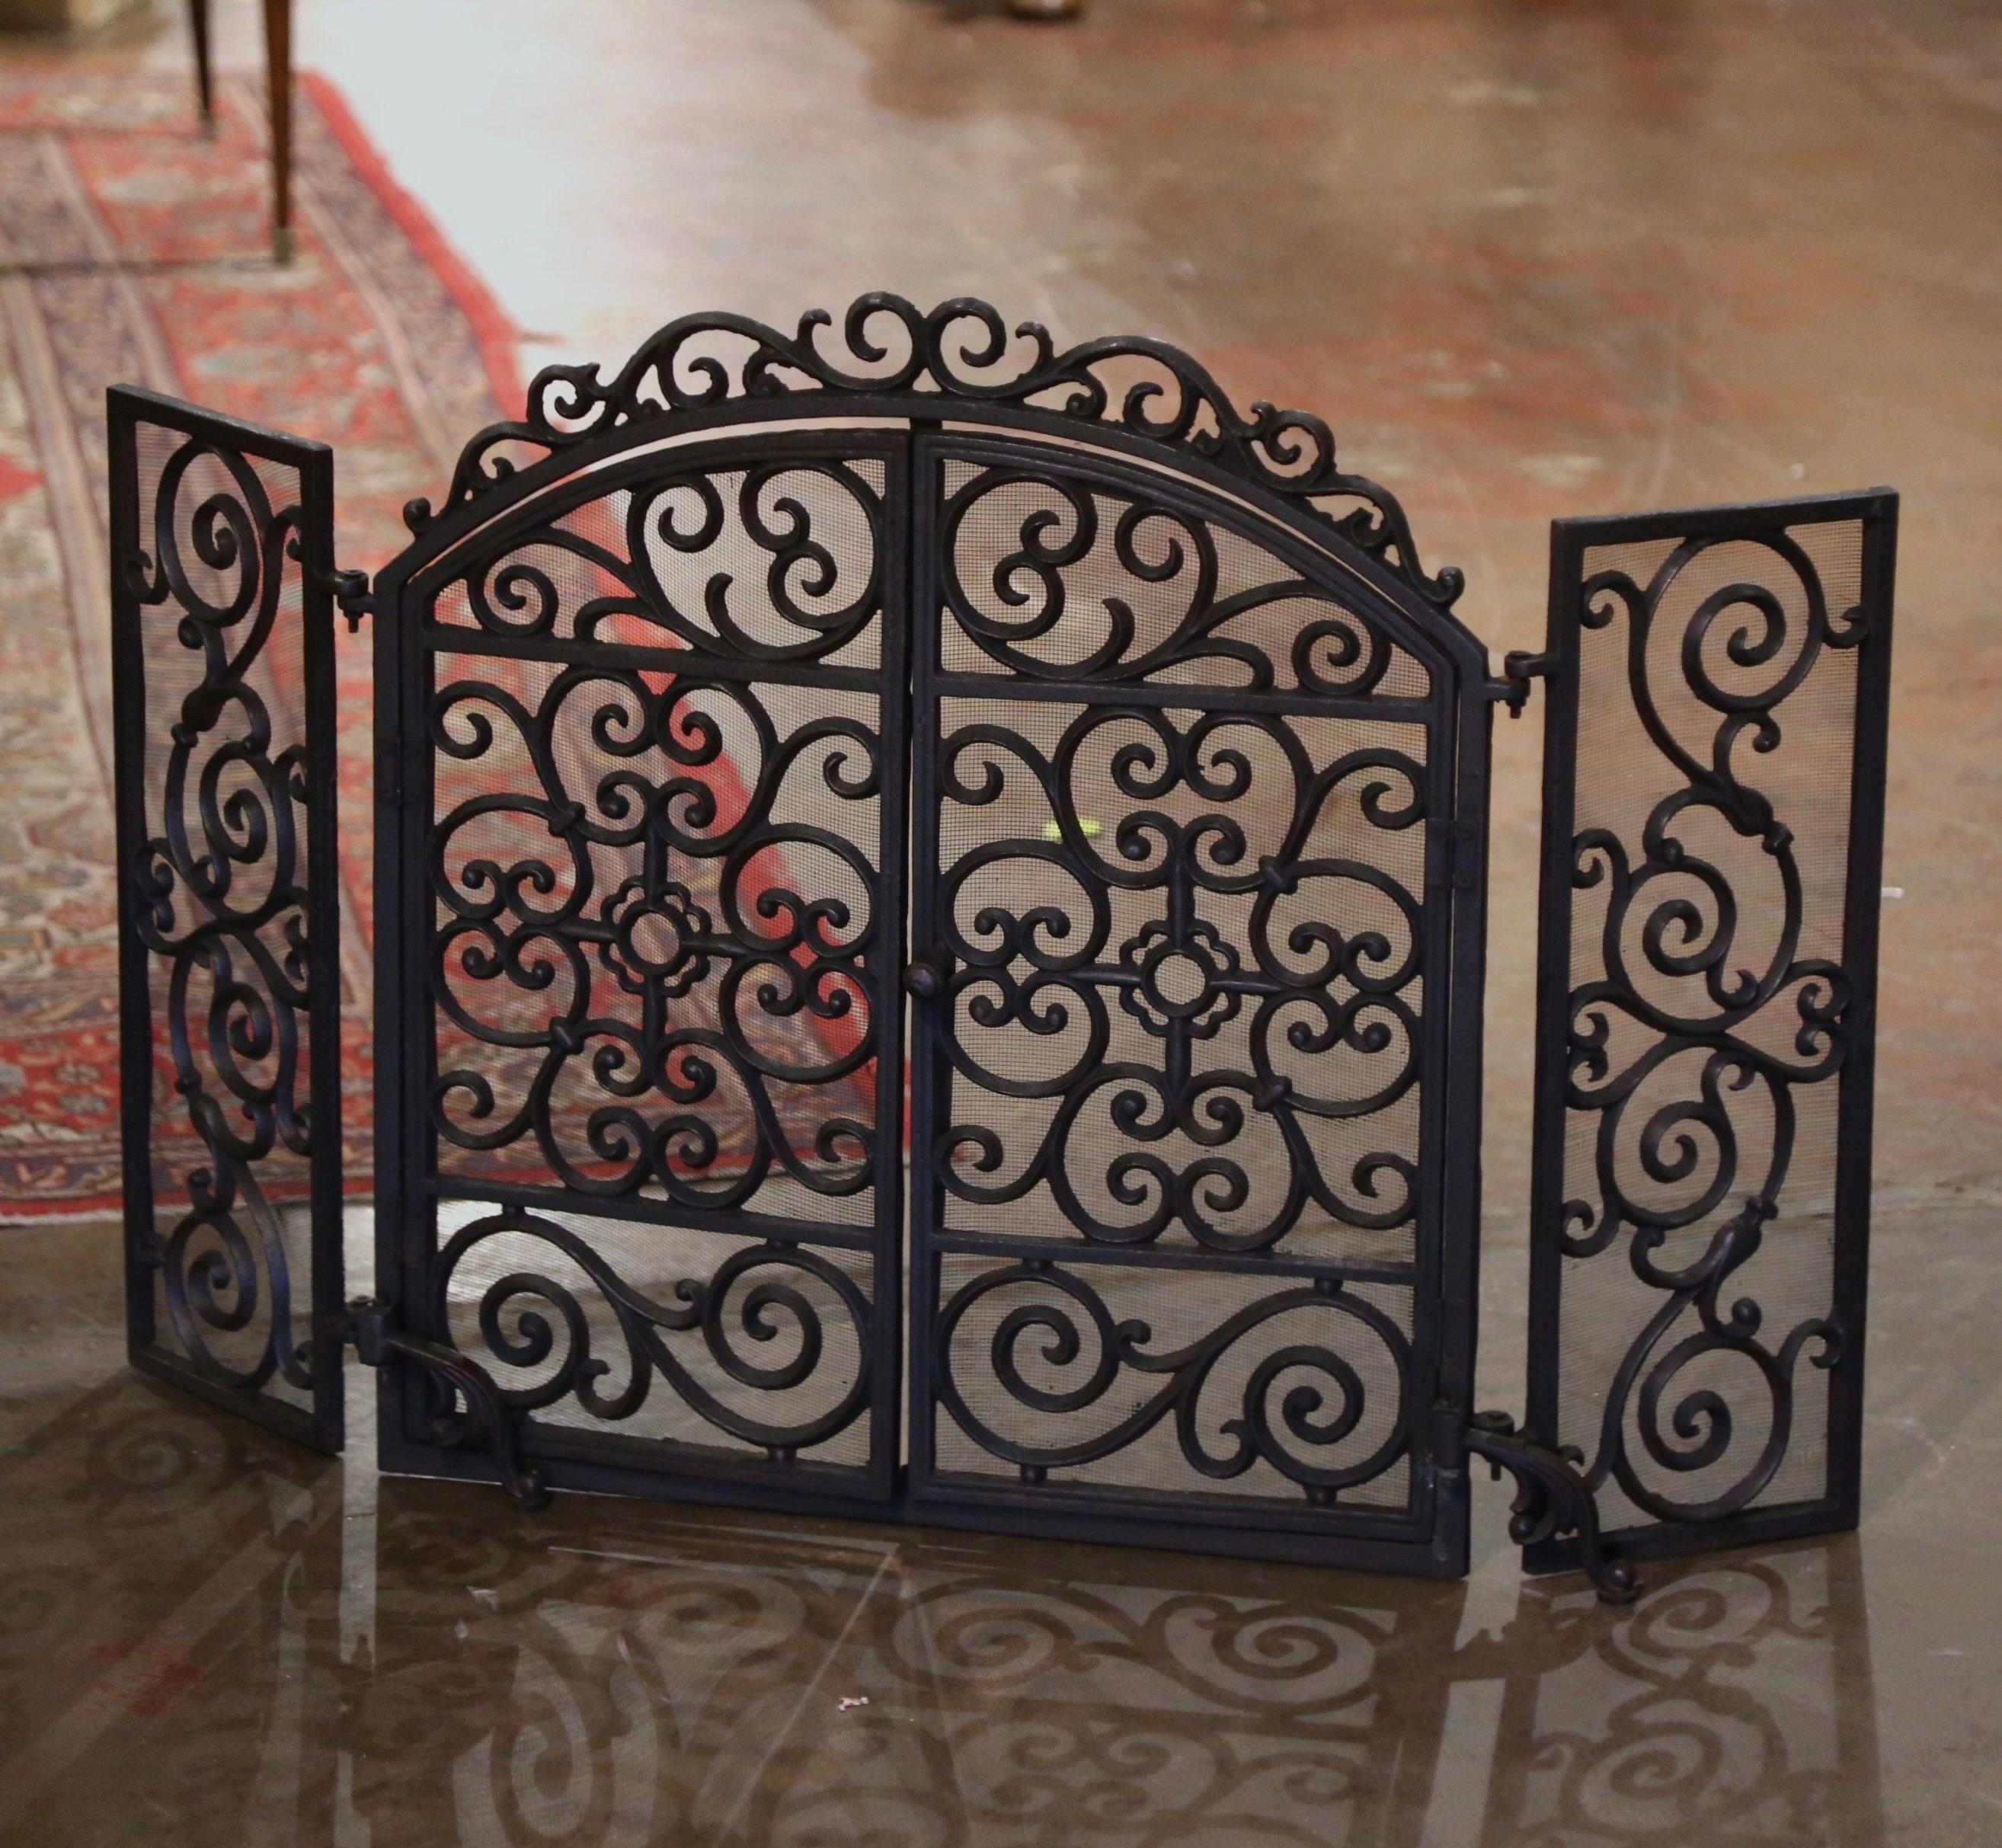 Decorate a fireplace hearth with this elegant and ornate antique iron screen. Forged in France circa 1880, the freestanding wrought iron piece with arched top stands on small front feet, and is dressed with two folding sides (8